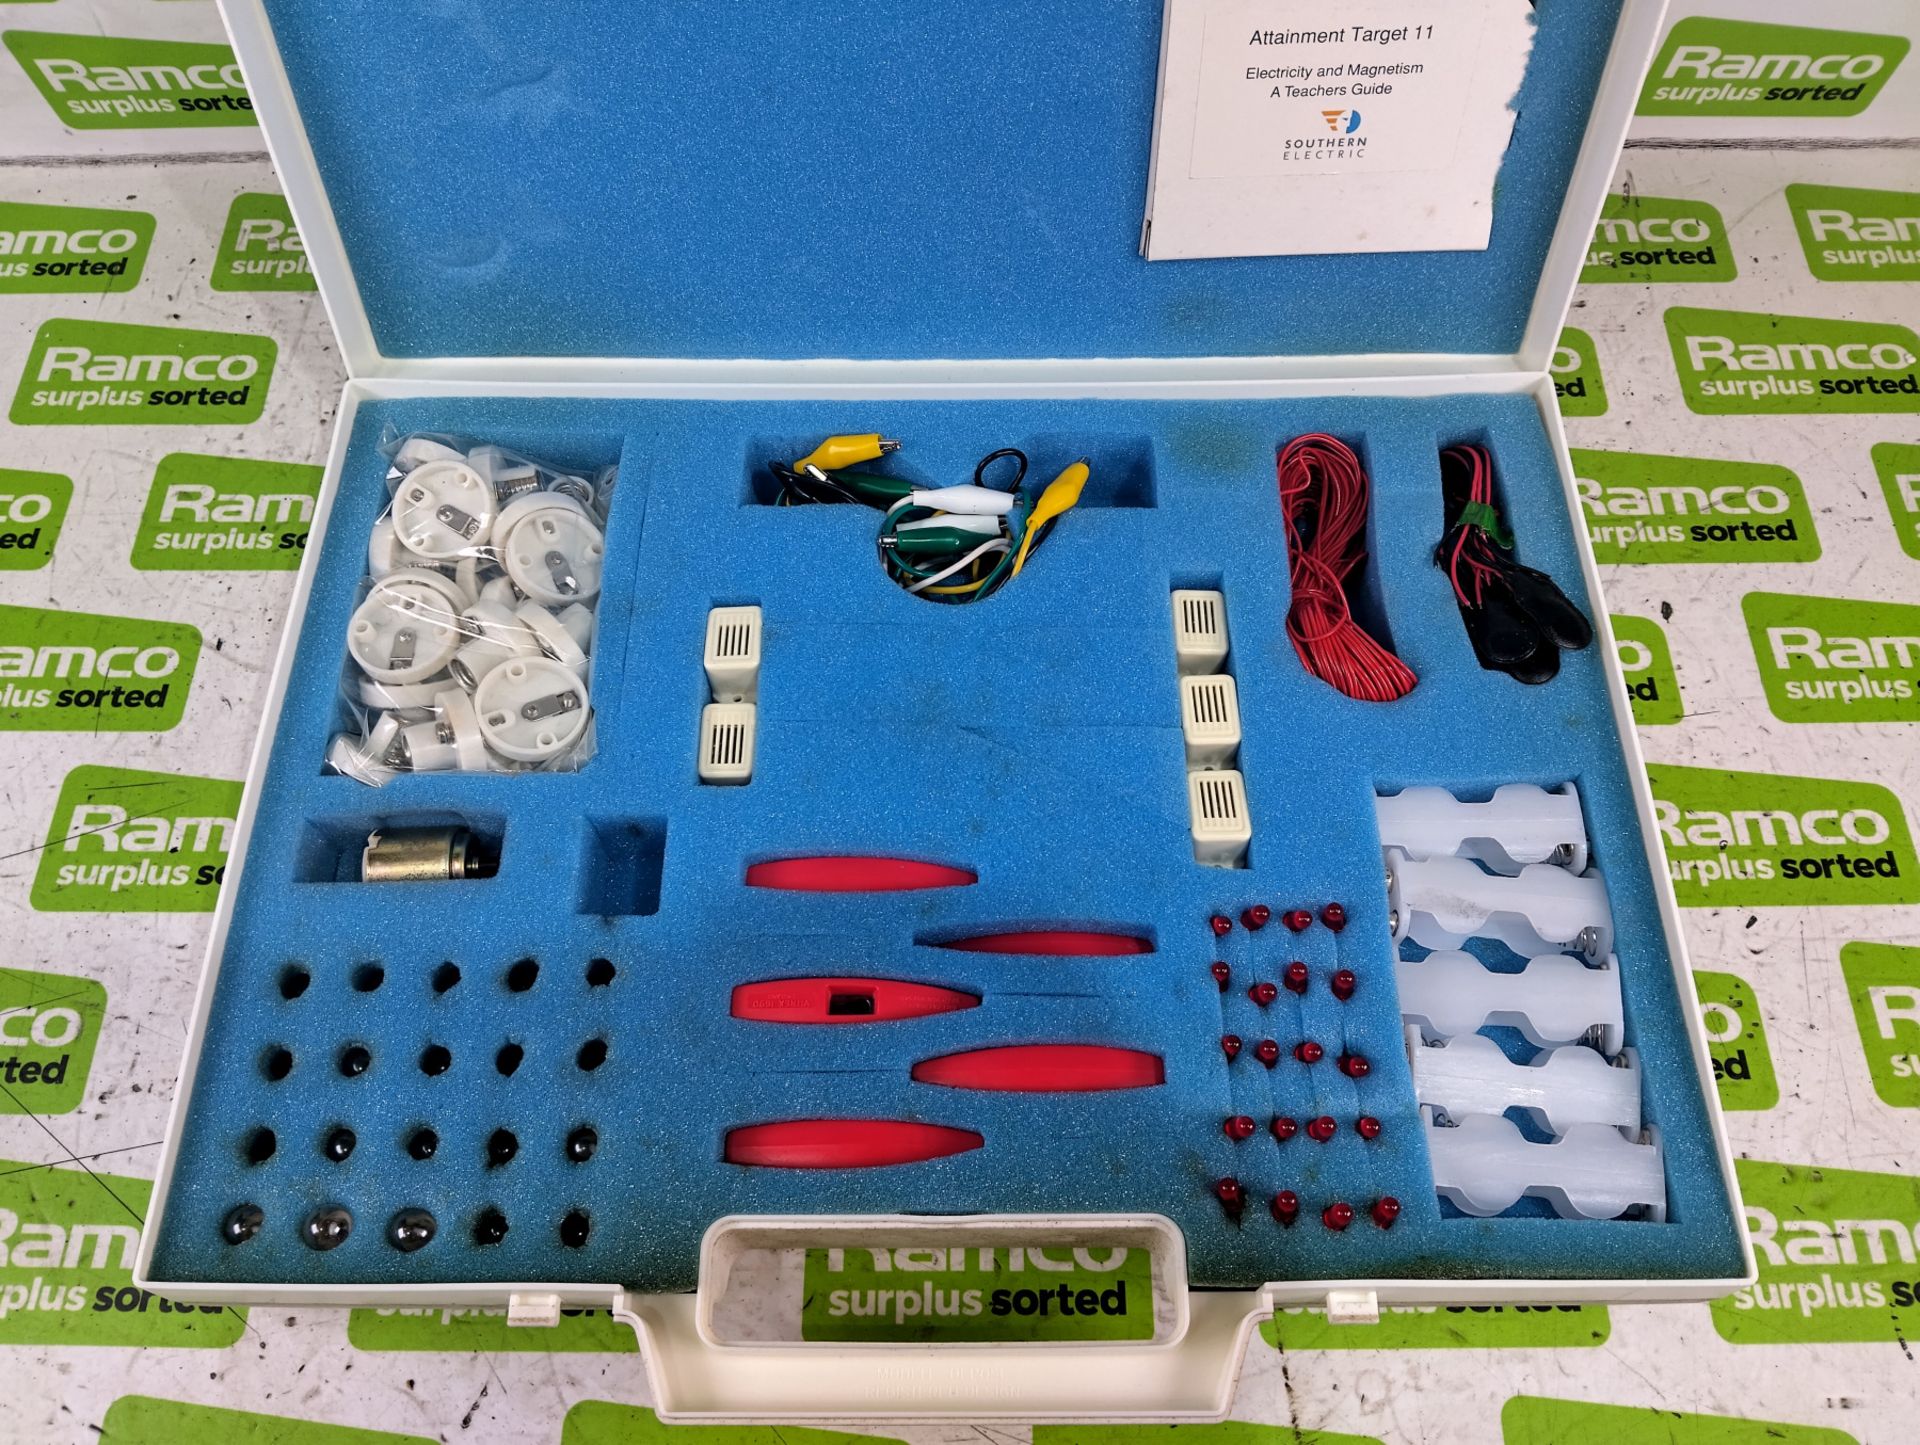 Southern Electric - The Electric Box - electronics kit for schools - Bild 3 aus 4